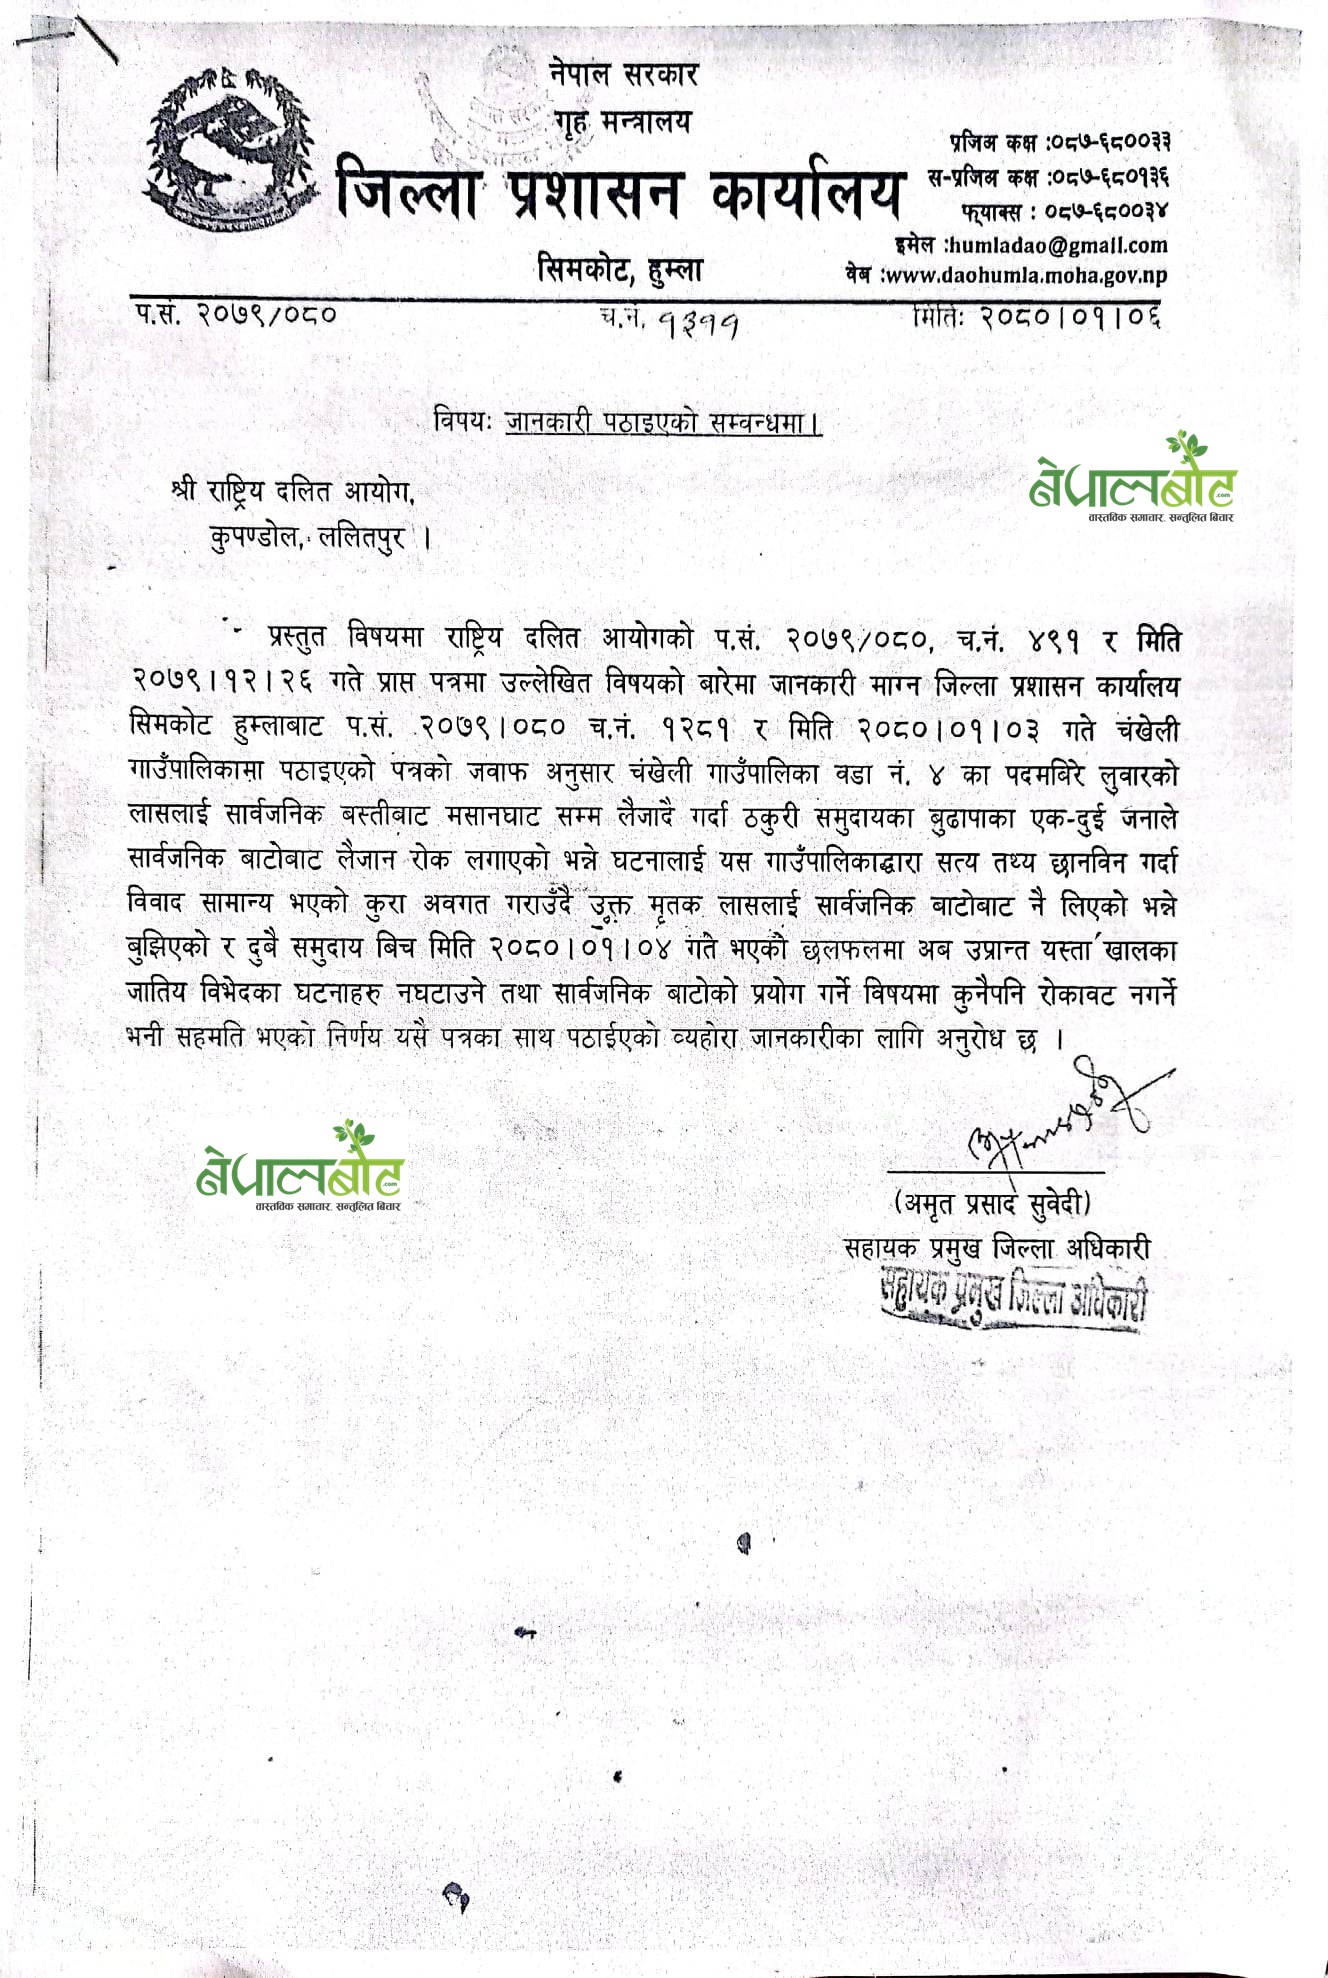 DAO Letter Reply for Dalit commission1682597783.jpg